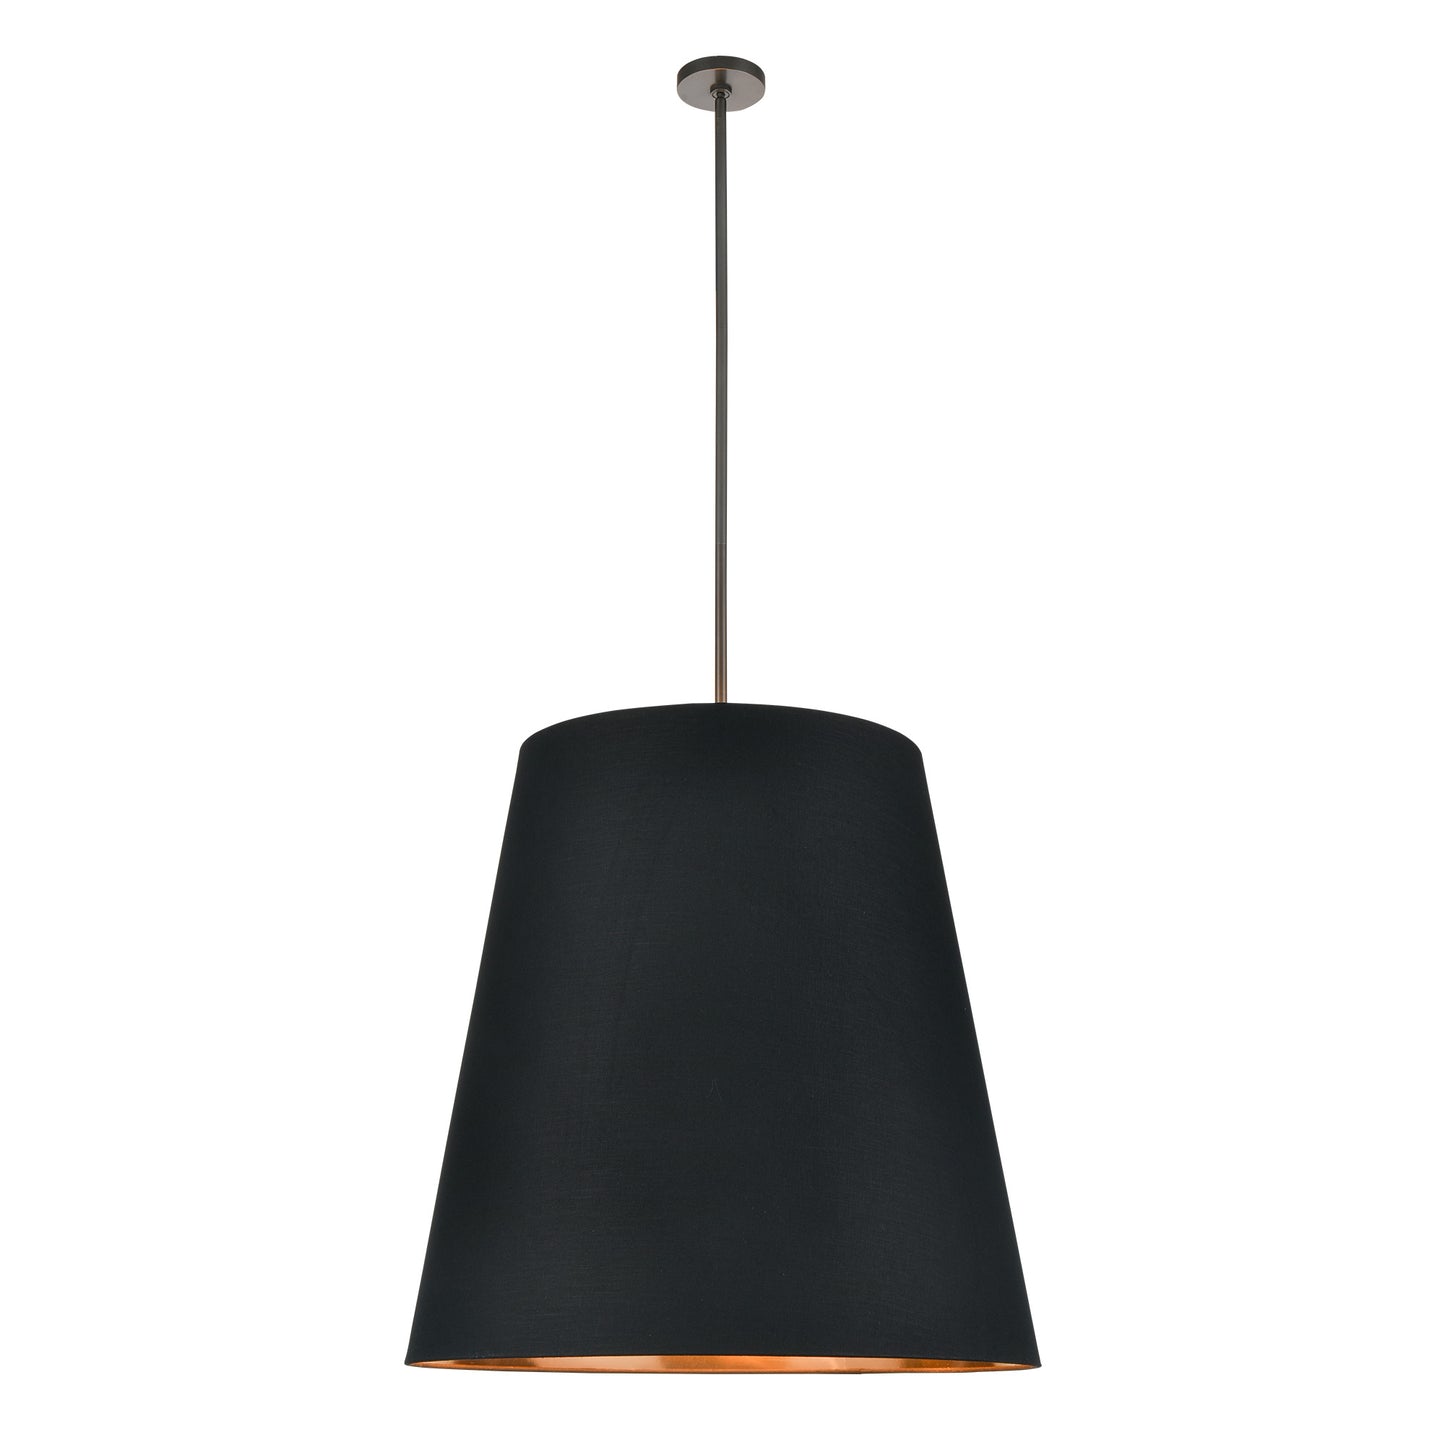 PD311030UBBG Calor 3 Light 30" Urban Bronze With Black Linen And Gold Parchment Shade Pendant